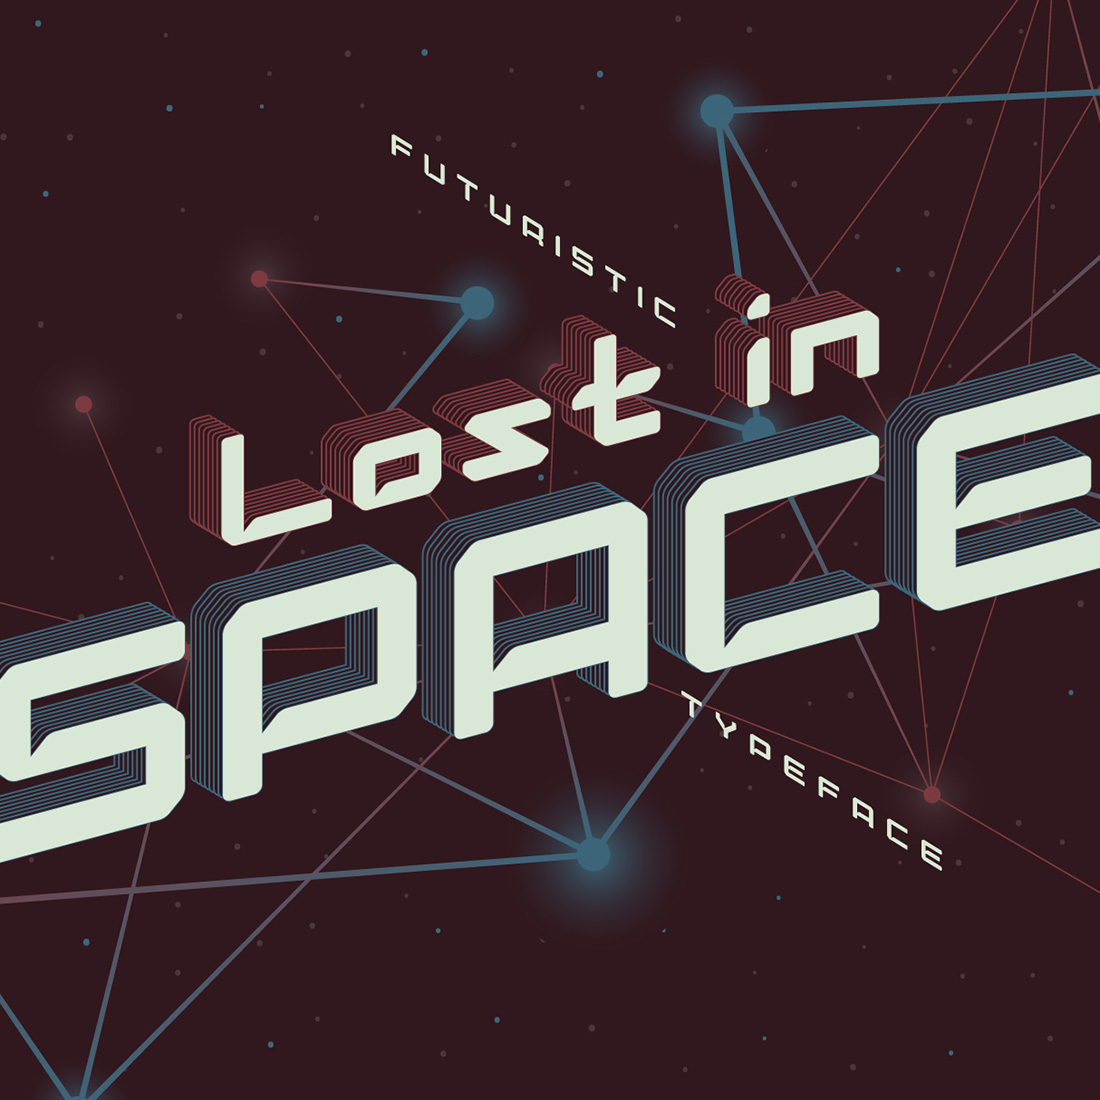 Futuristic Typeface Lost in Space Font cover image.